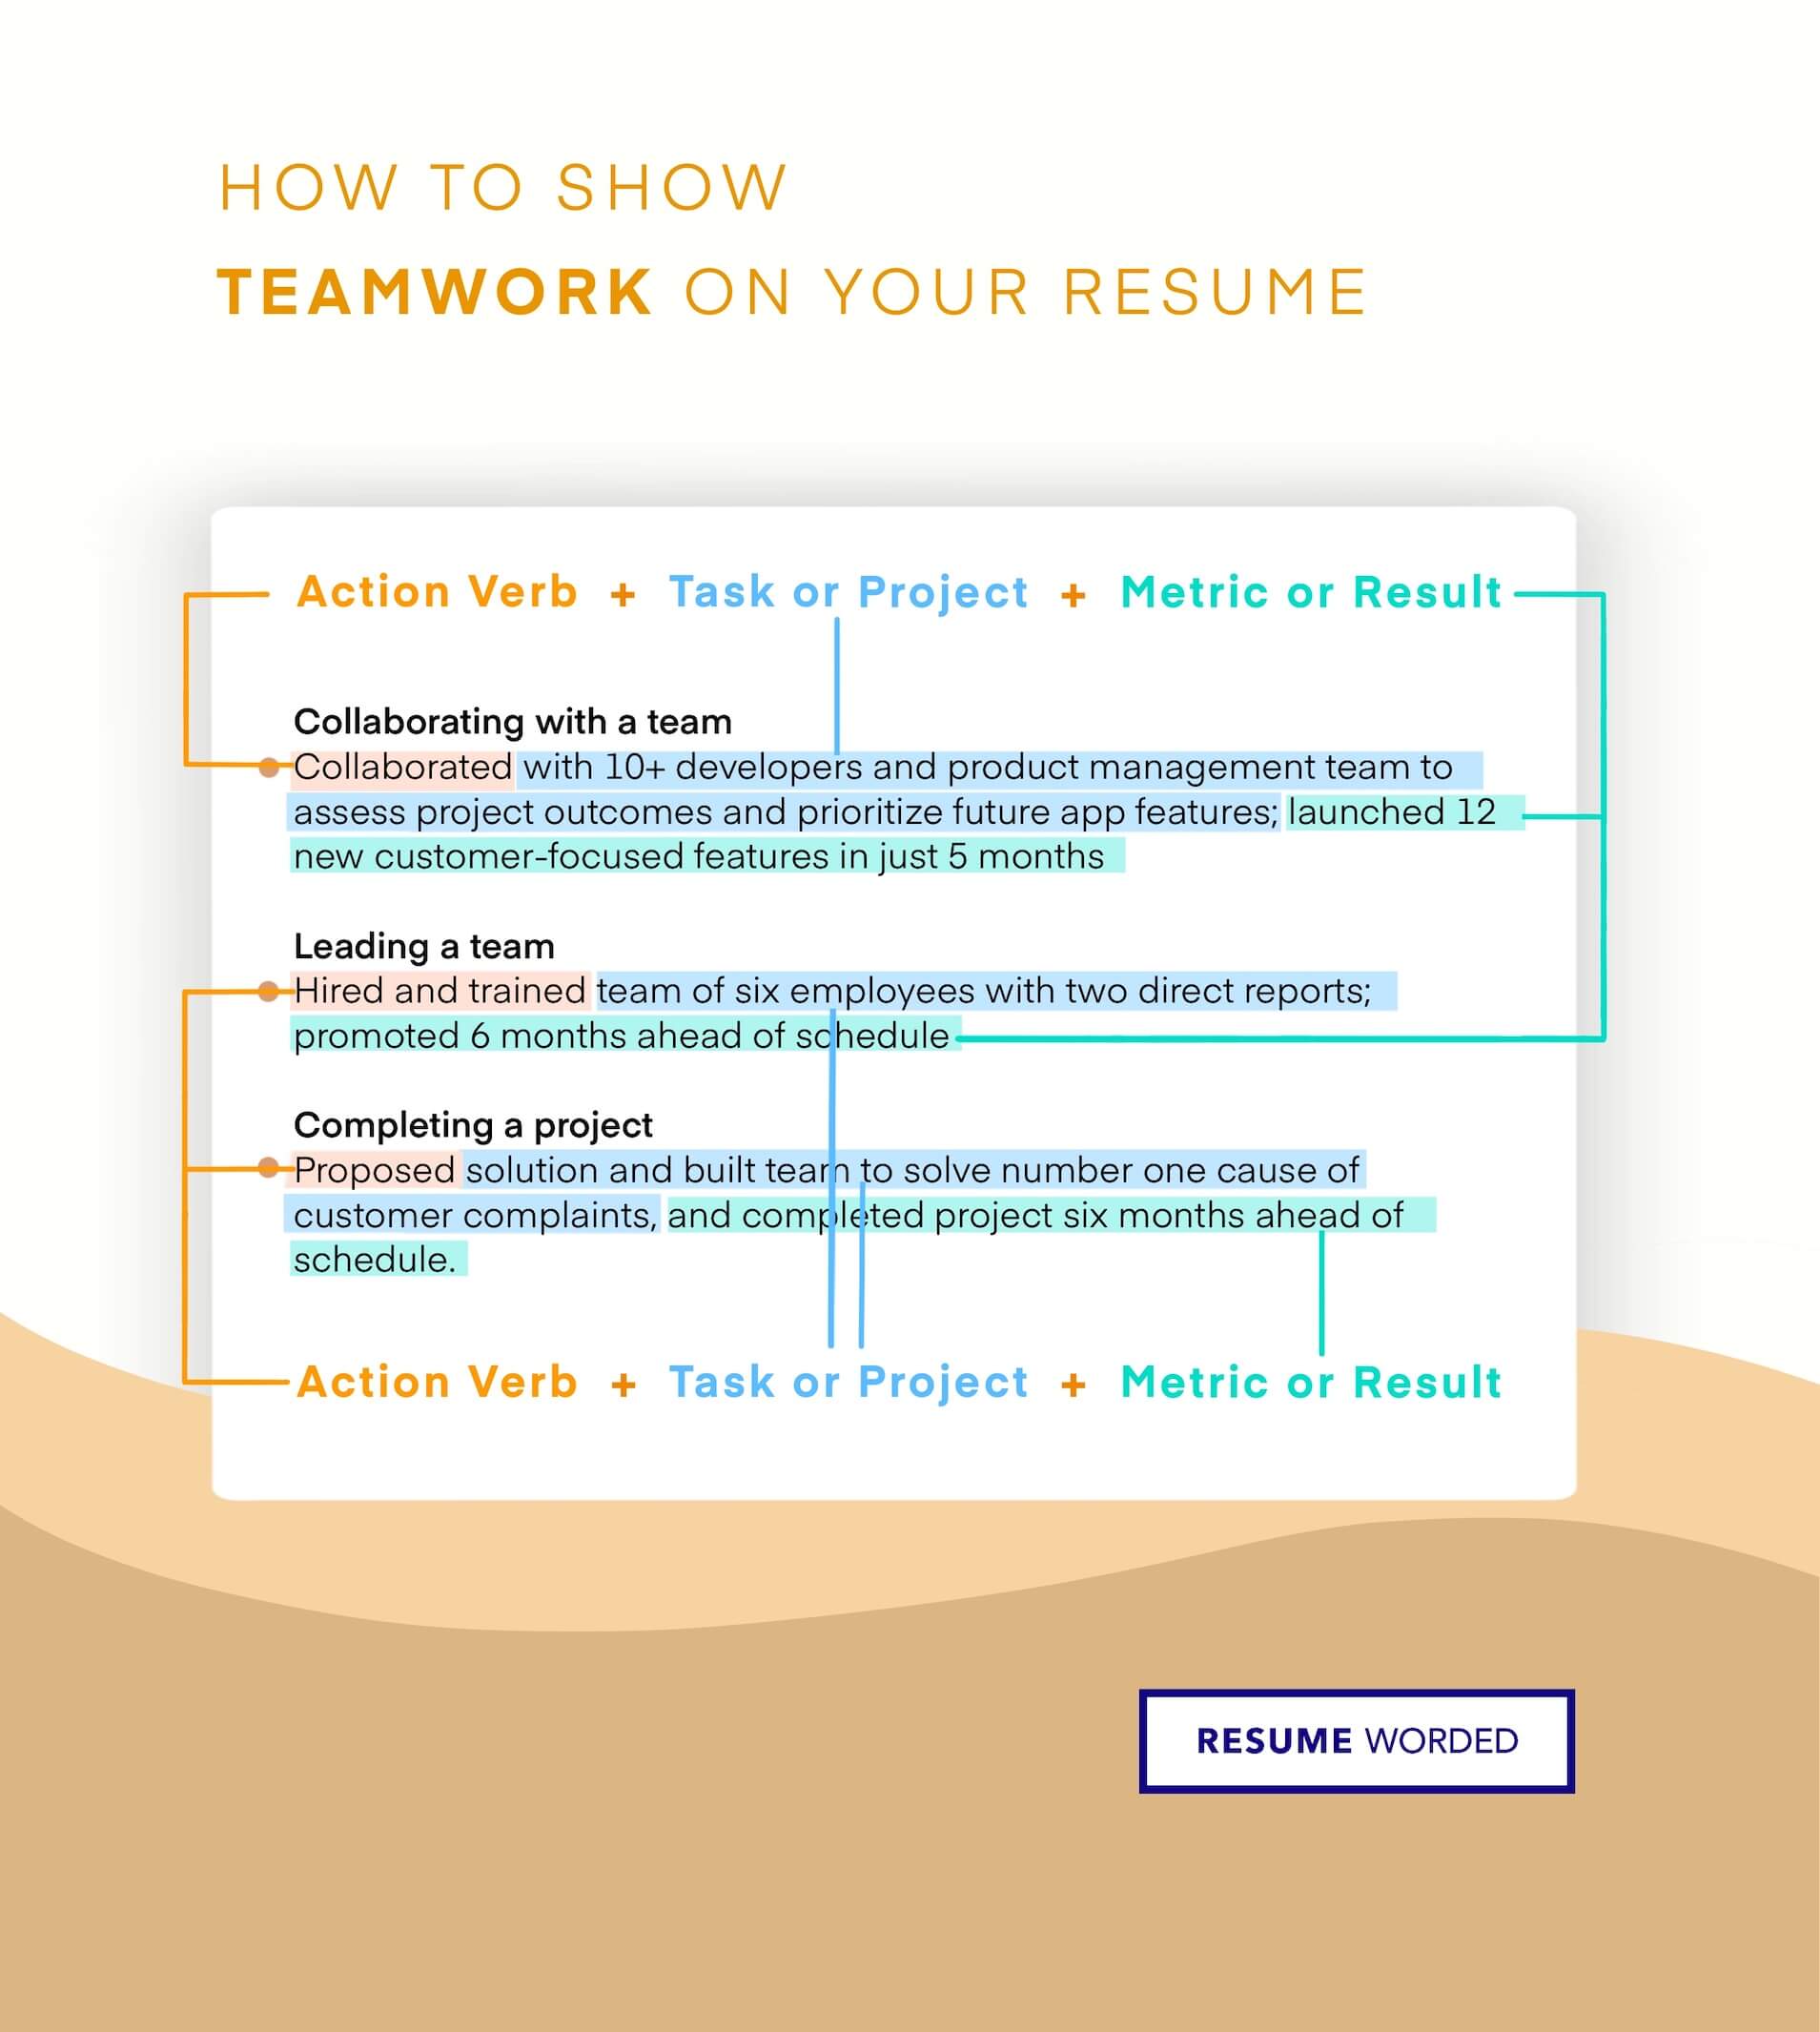 Showcase your ability to collaborate with others - Brand Strategist Resume